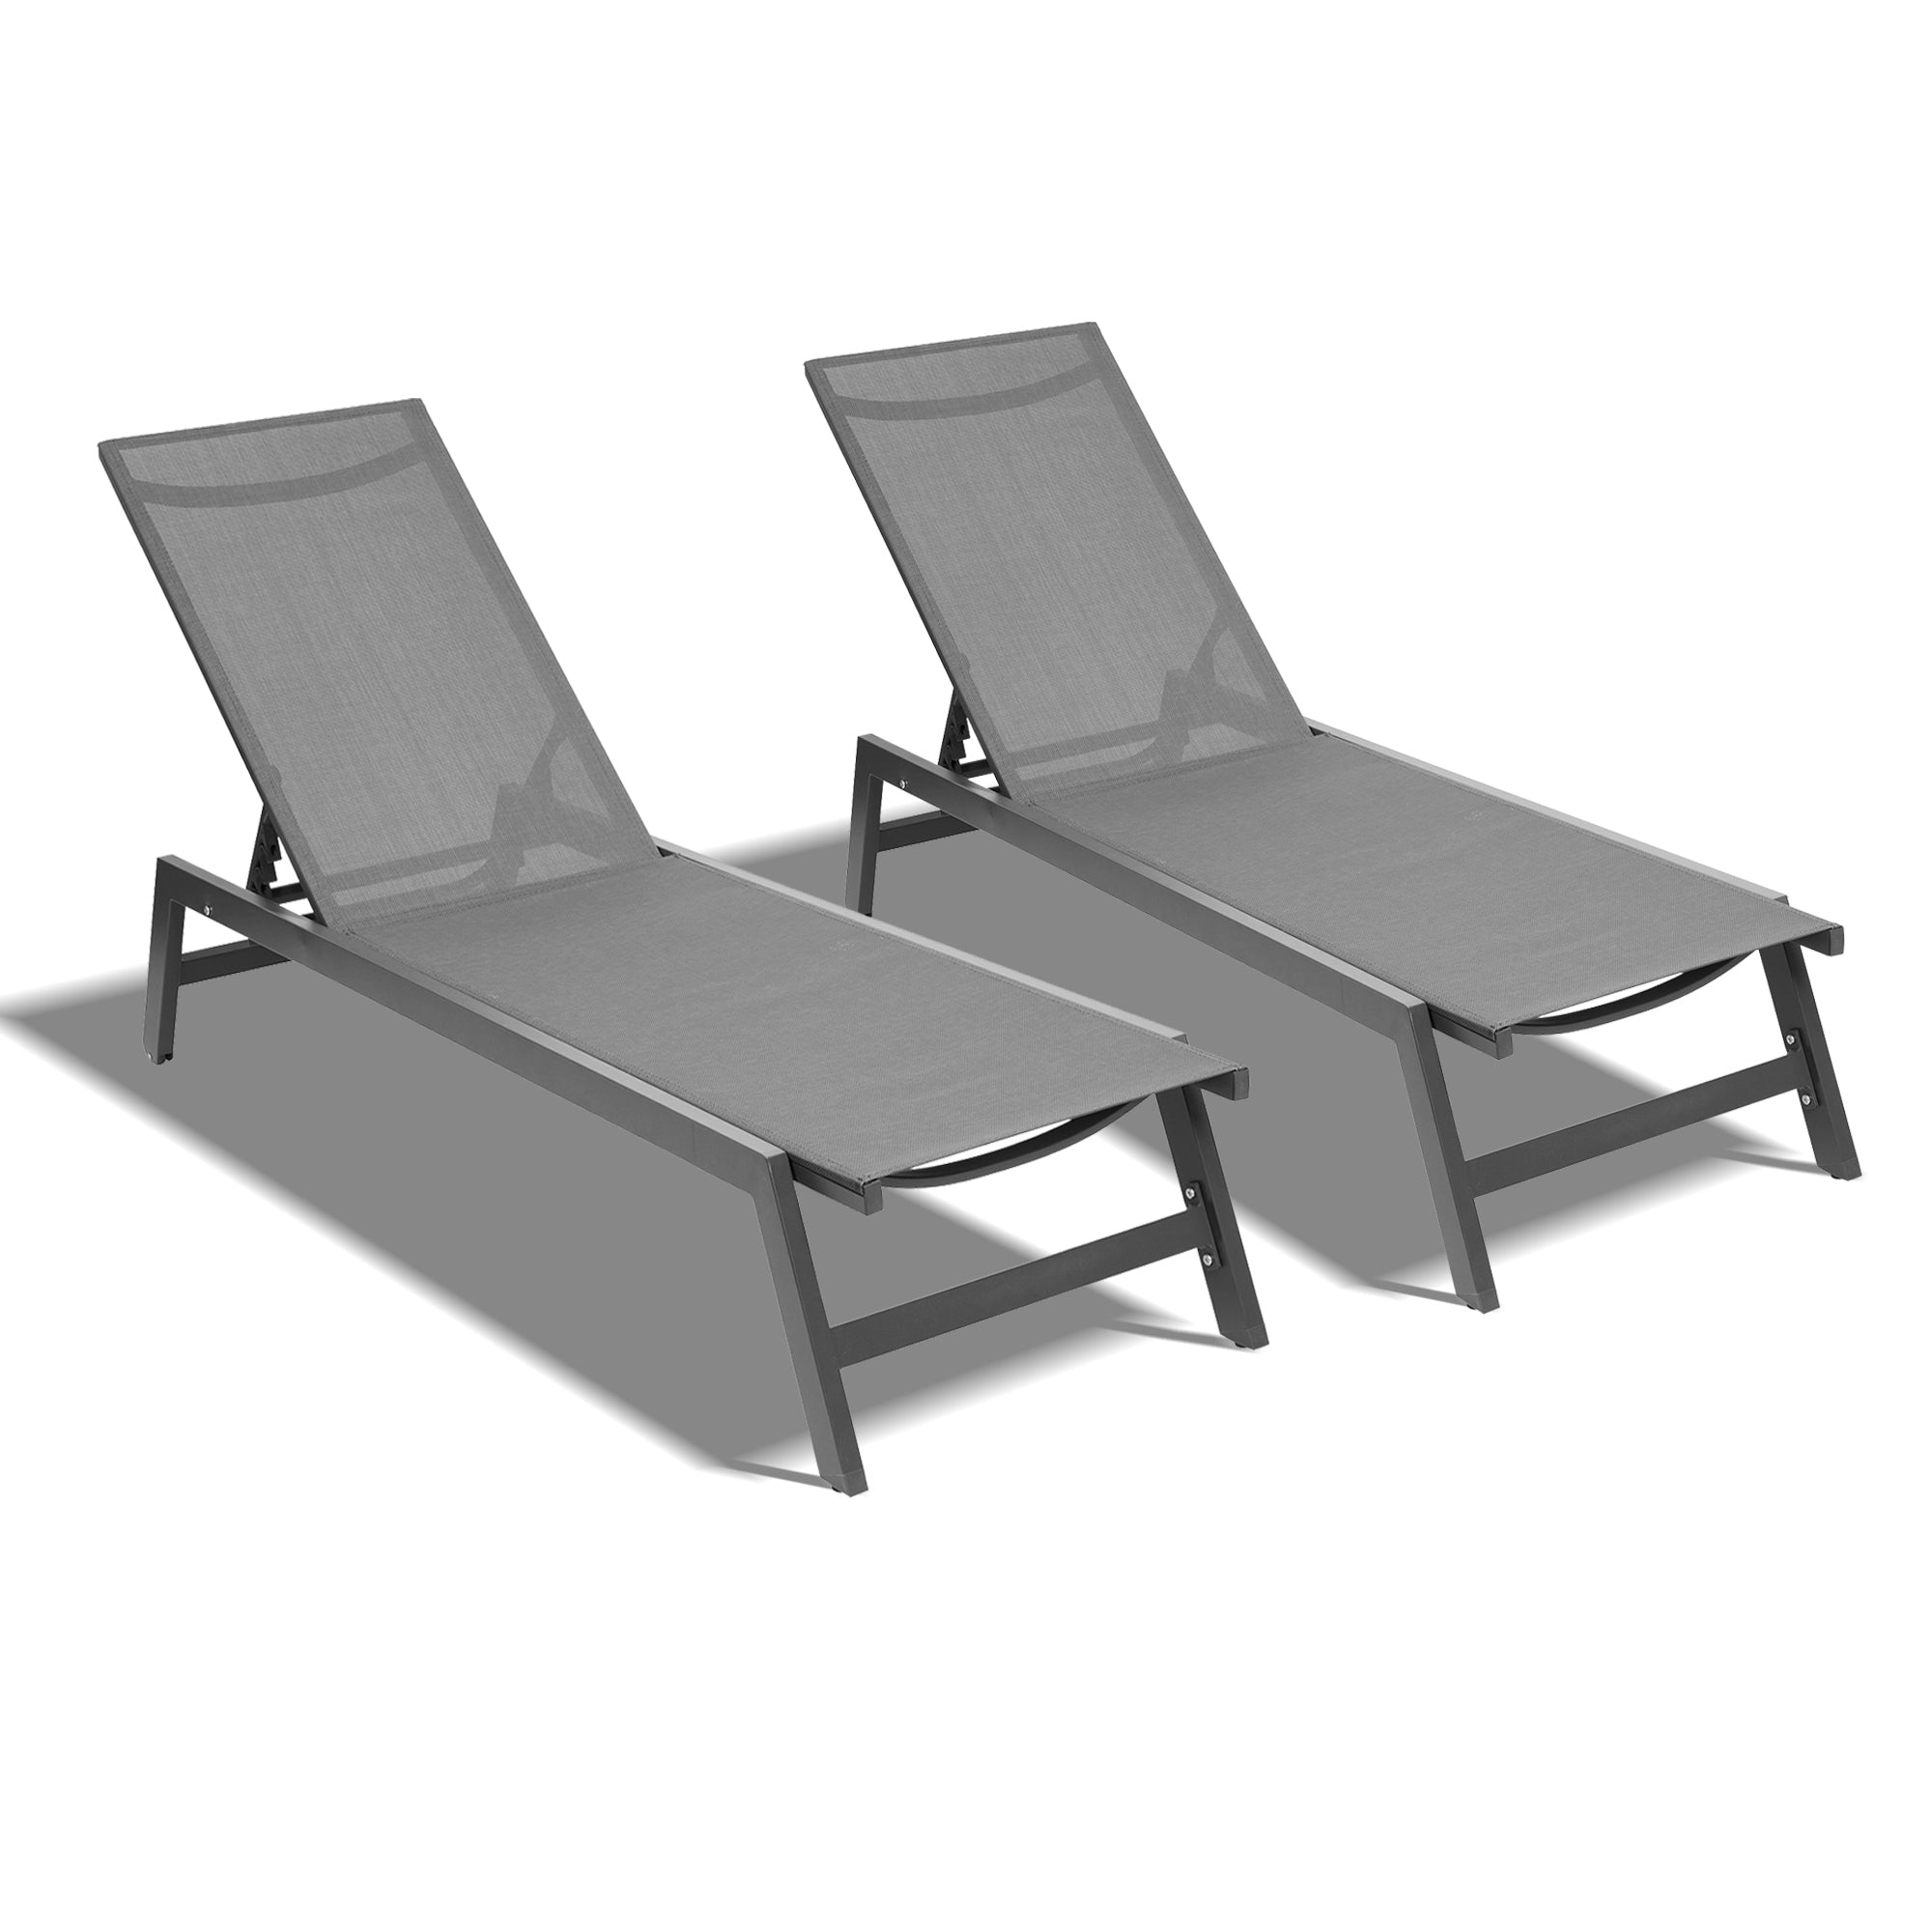 2Pcs Outdoor Chaise Lounge Chairs with 5-Position Adjustable Aluminum Recliner, Grey